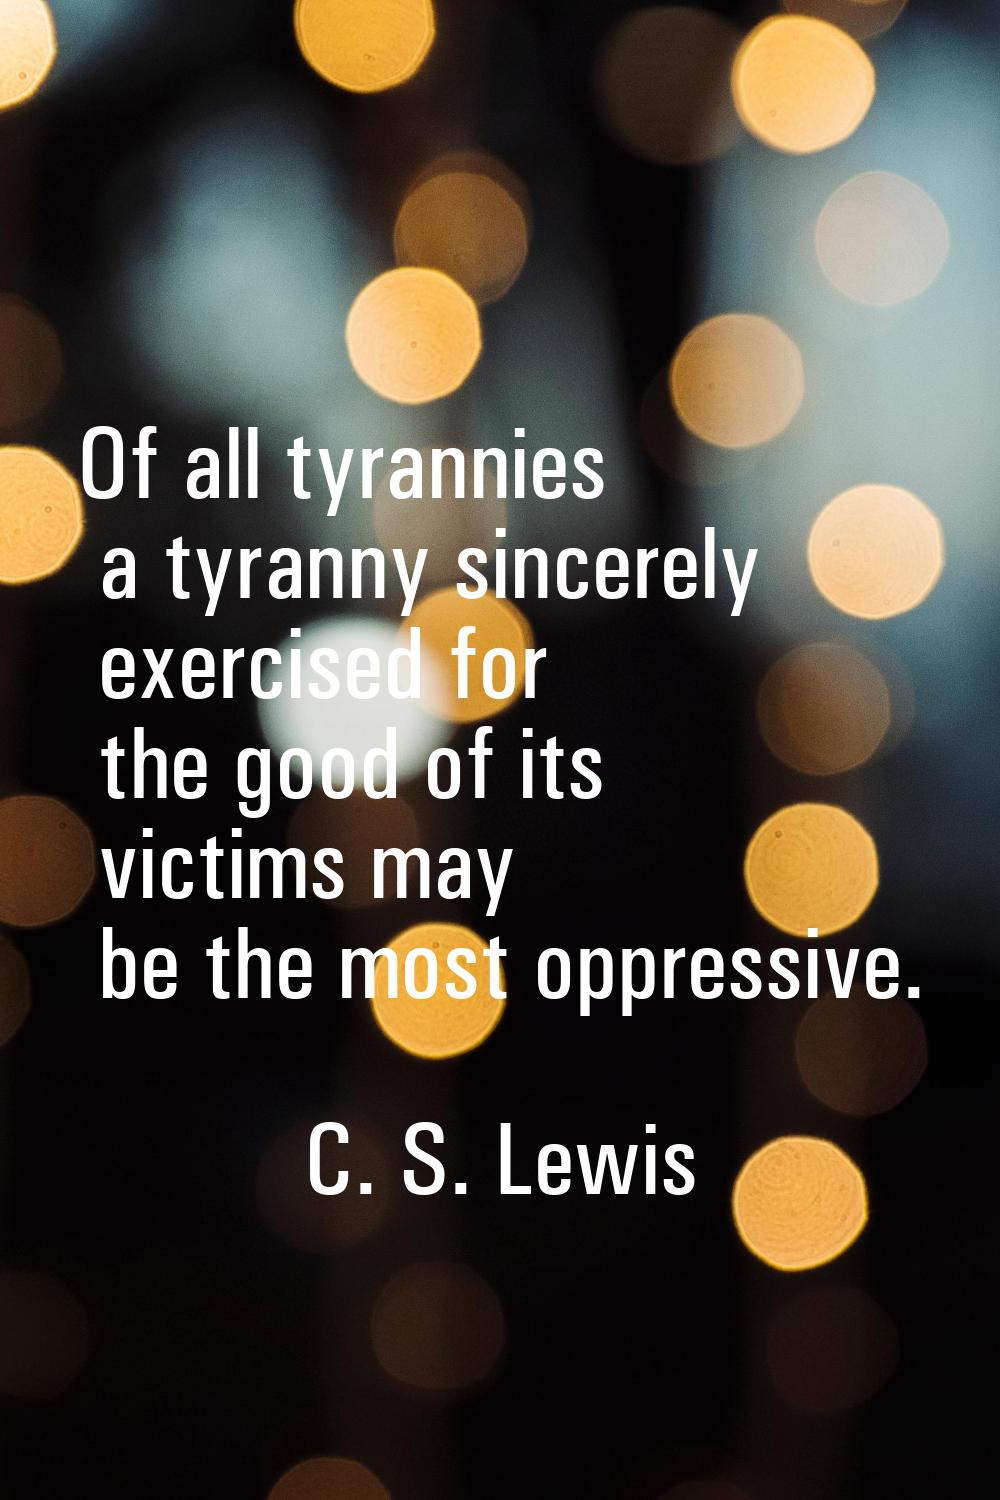 Of all tyrannies a tyranny sincerely exercised for the good of its victims may be the most oppressi